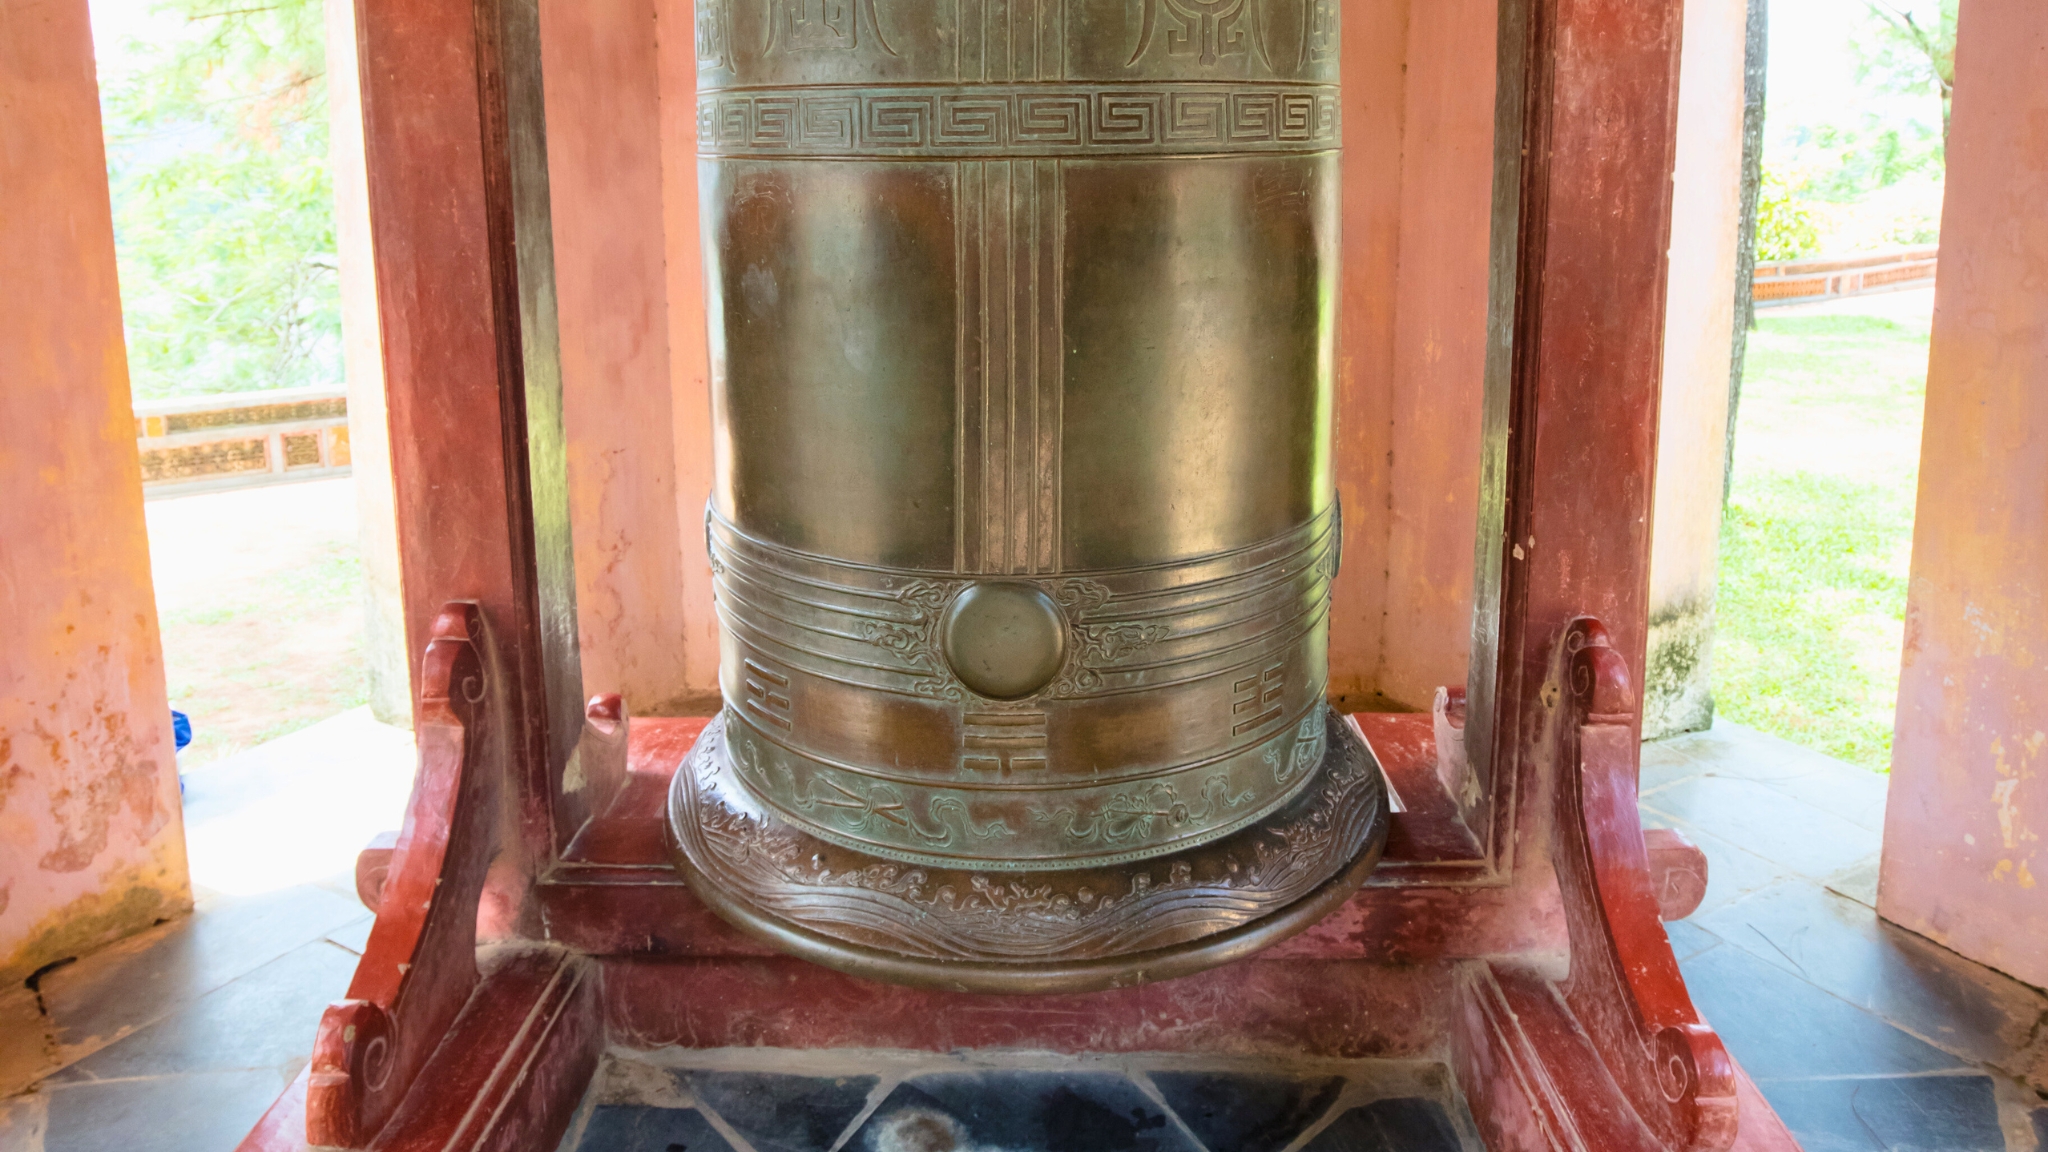 The Great Bell of Thien Mu Pagoda